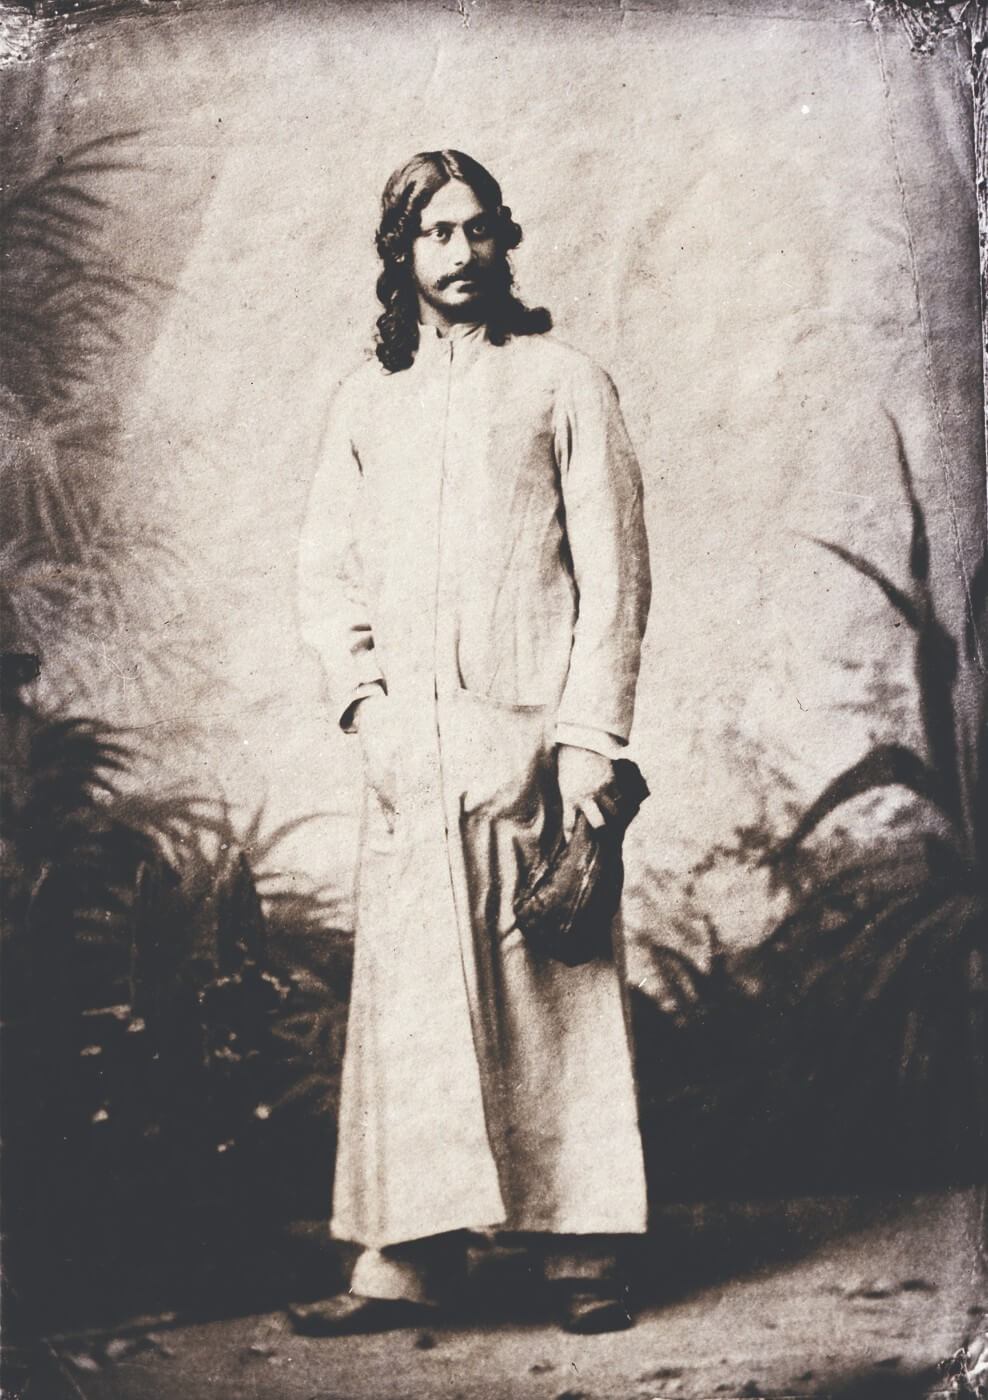 Vintage Photograph Of A Young Rabindranath Tagore - Life Size Posters by Megaduta Sharma | Buy Posters, Frames, Canvas & Digital Art Prints | Small, Compact, Medium and Large Variants